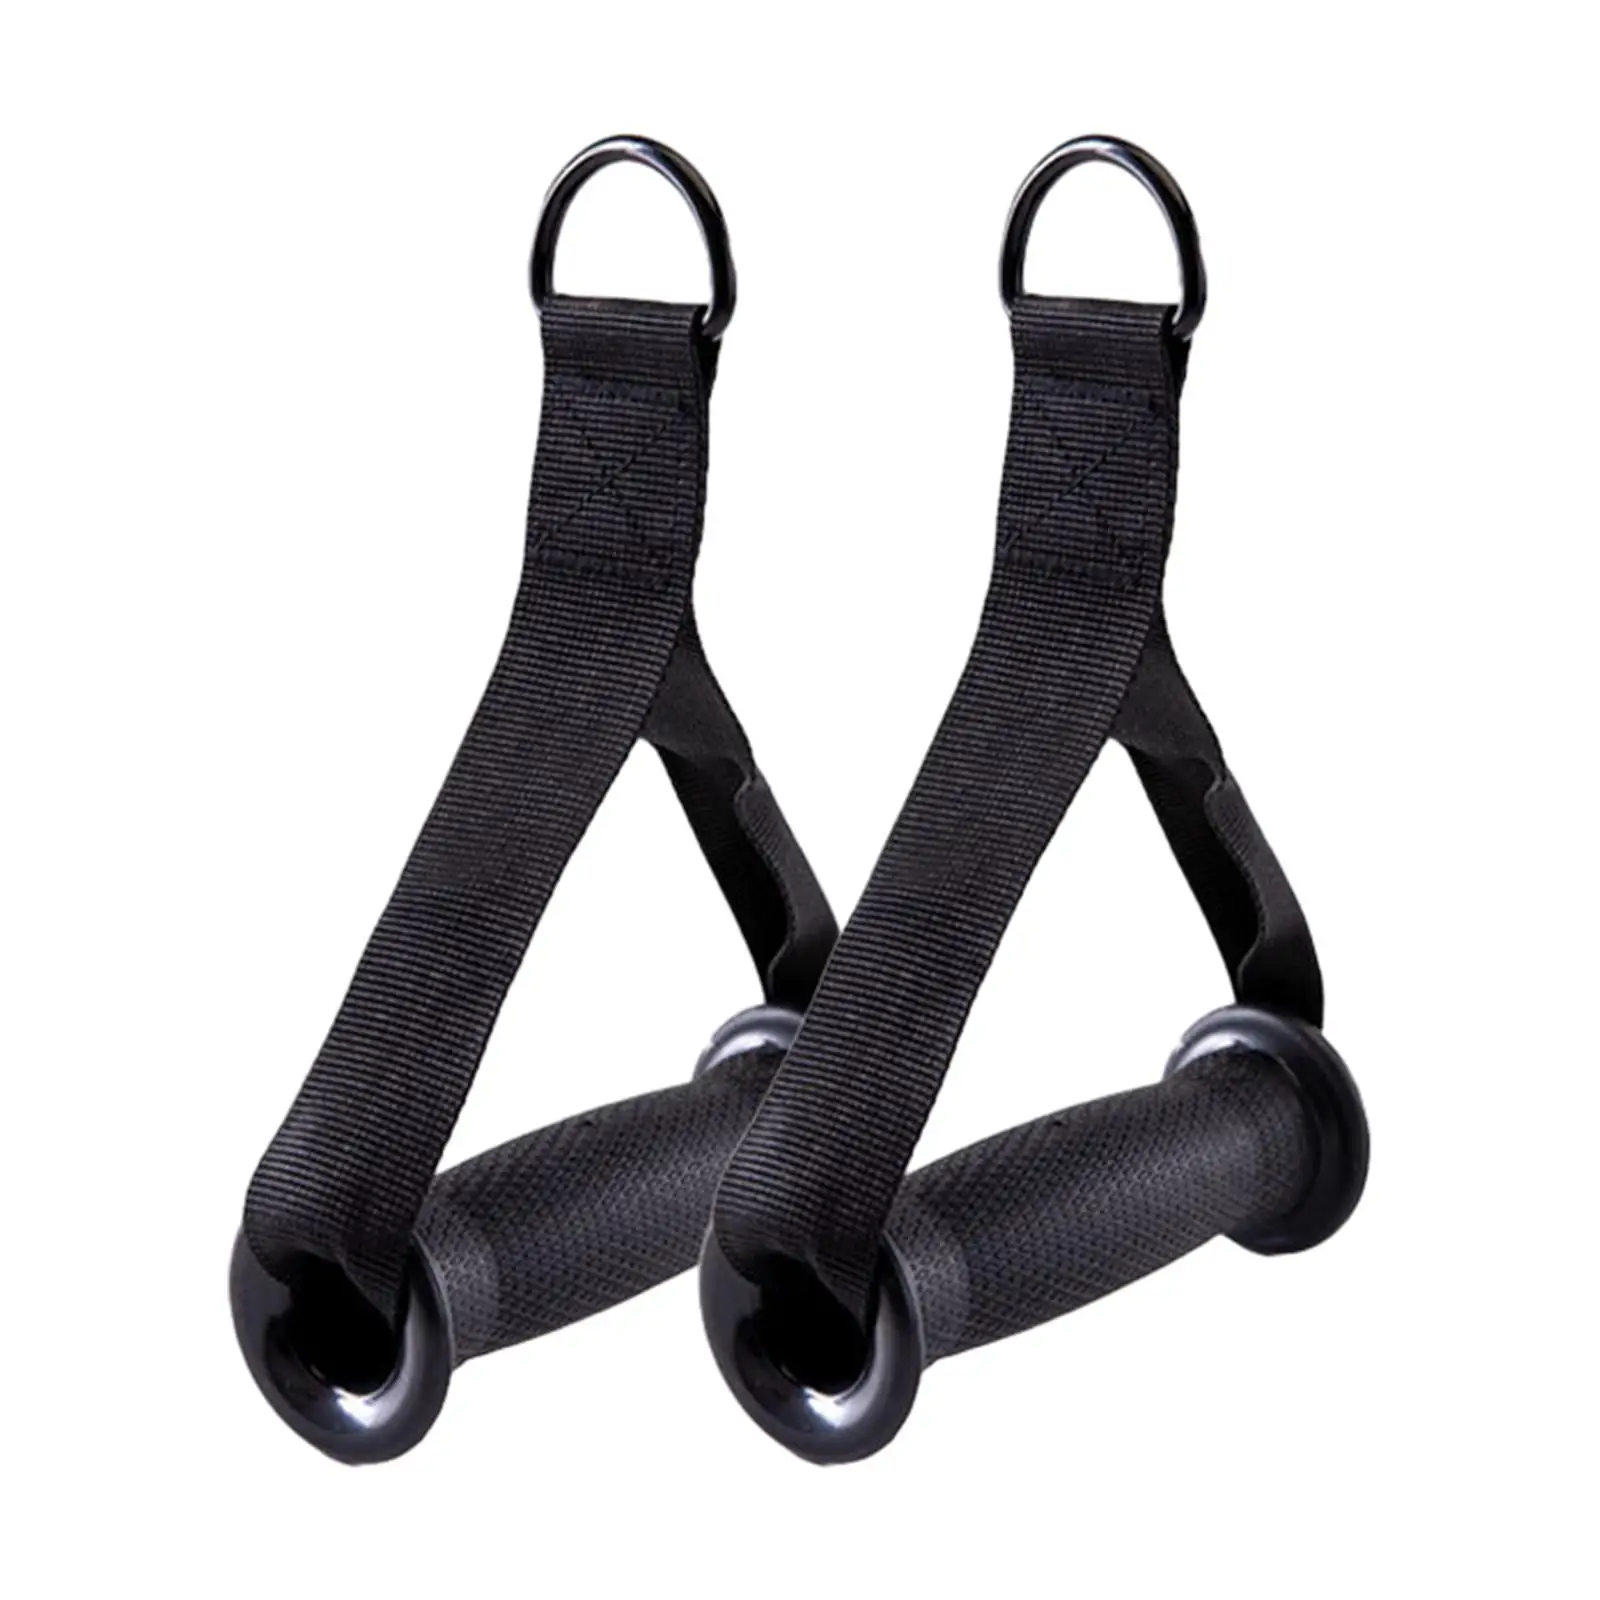 Resistance Band Handles Grips Black Exercise Handles for Strength Training Pilates Home Gym Equipment Pulley System Accessories